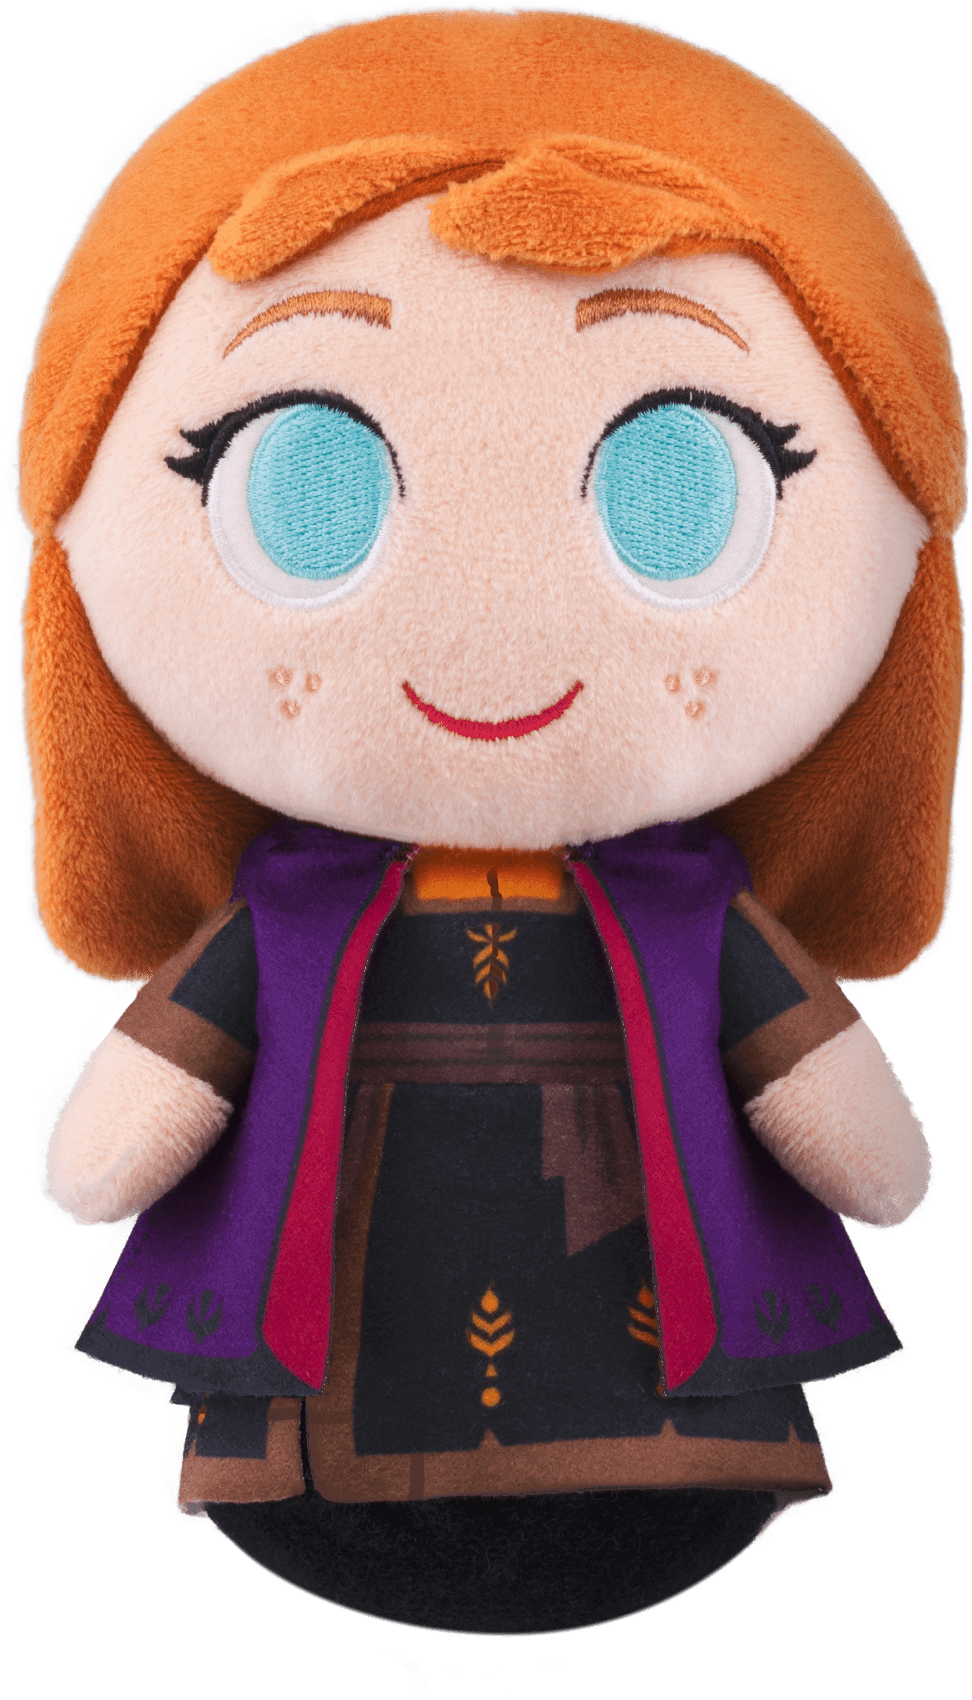 A Stuffed Toy With A Red Hair And A Purple Robe